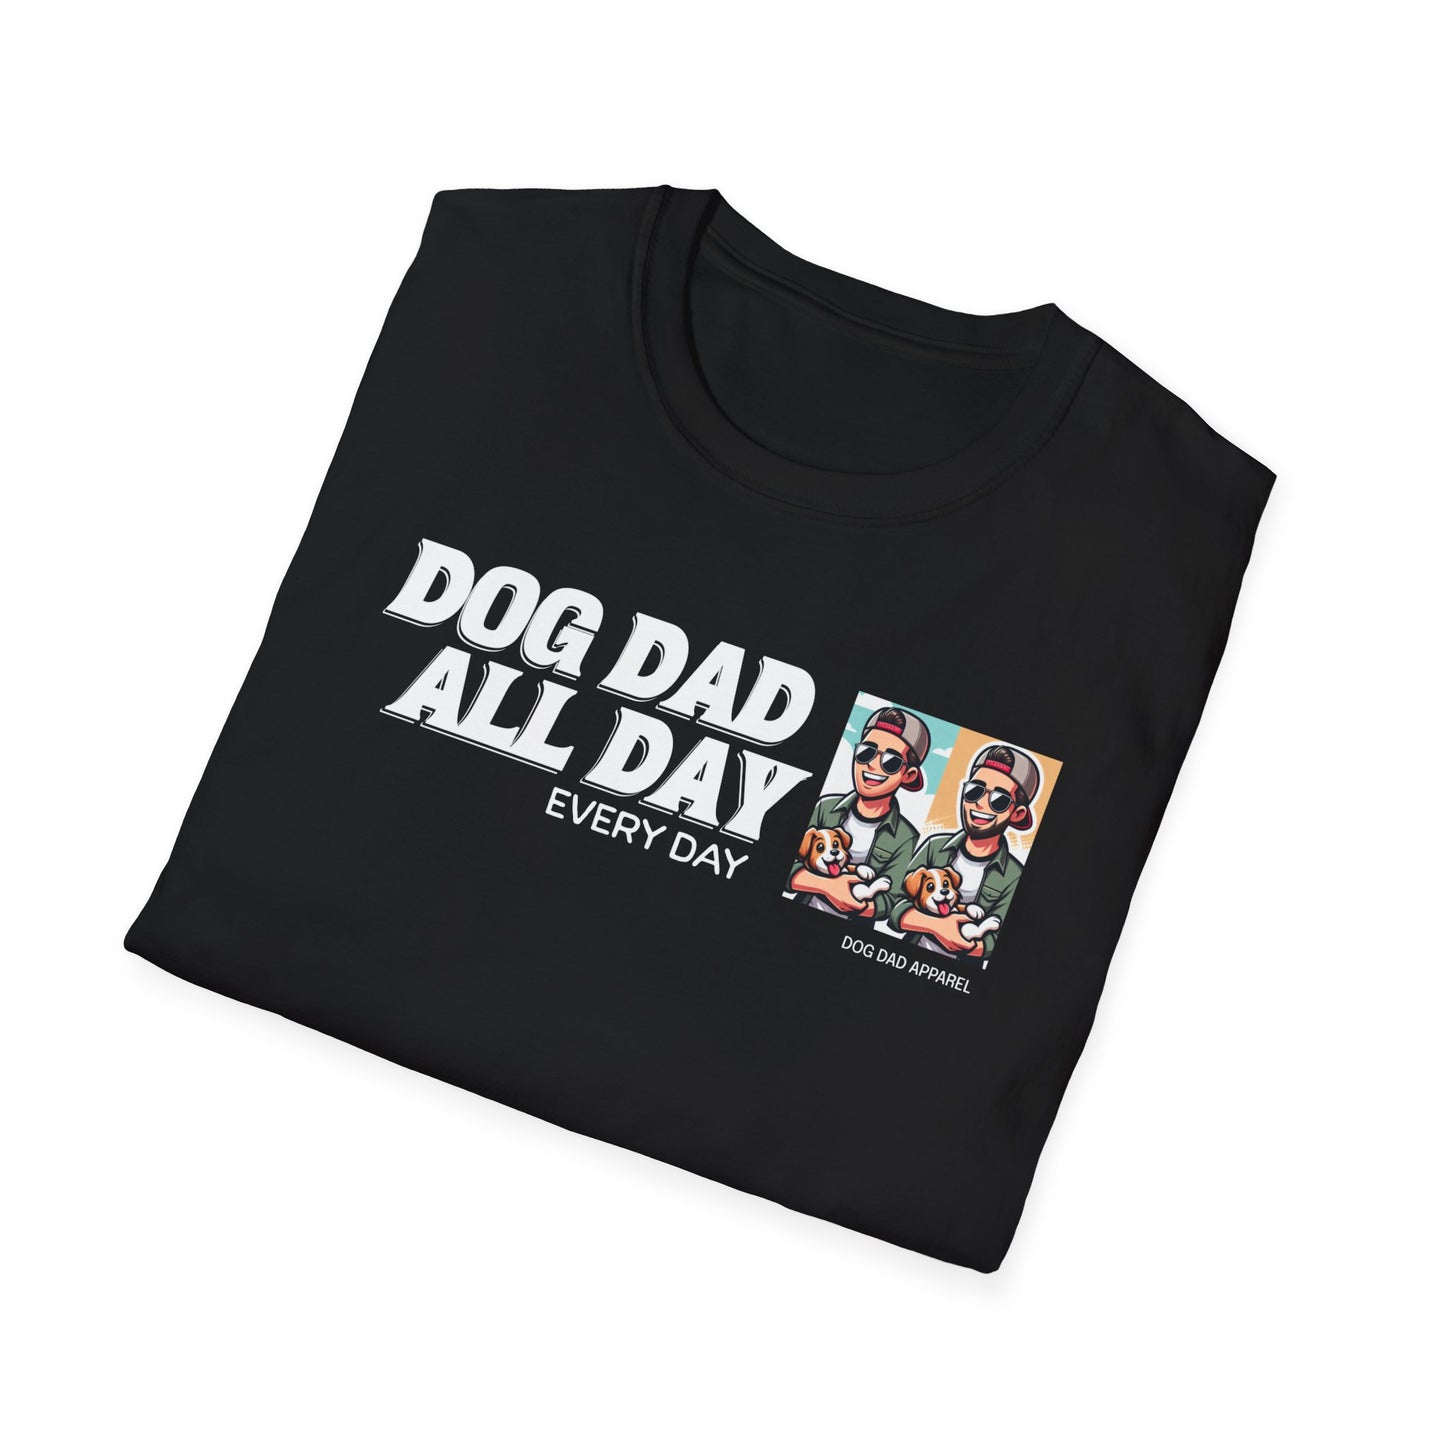 Dog Dad All Day - Graphic Tee